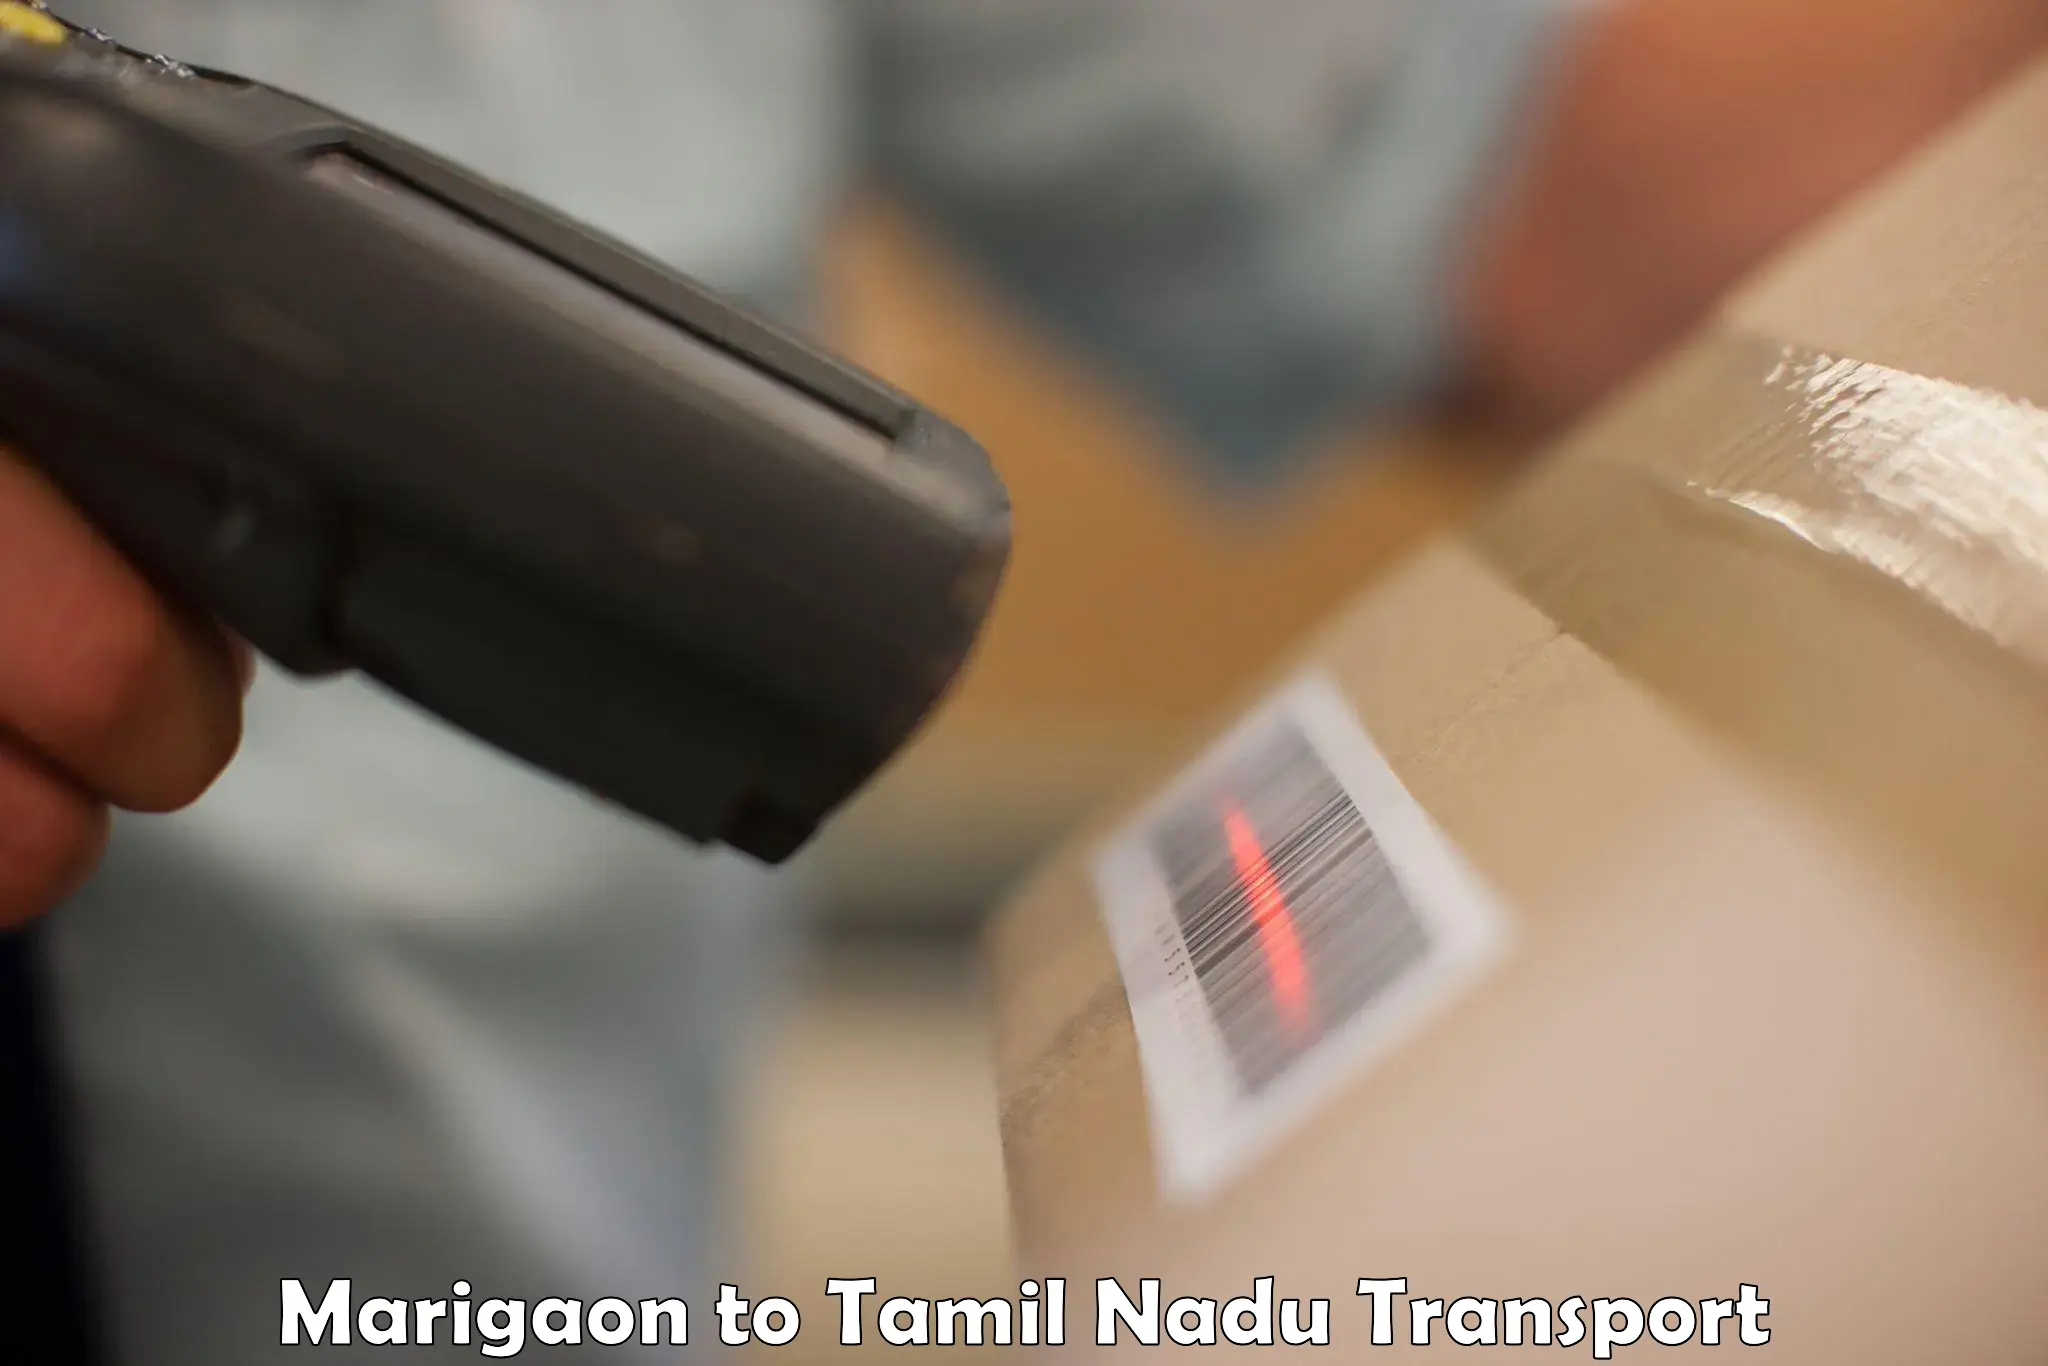 Truck transport companies in India Marigaon to Coimbatore